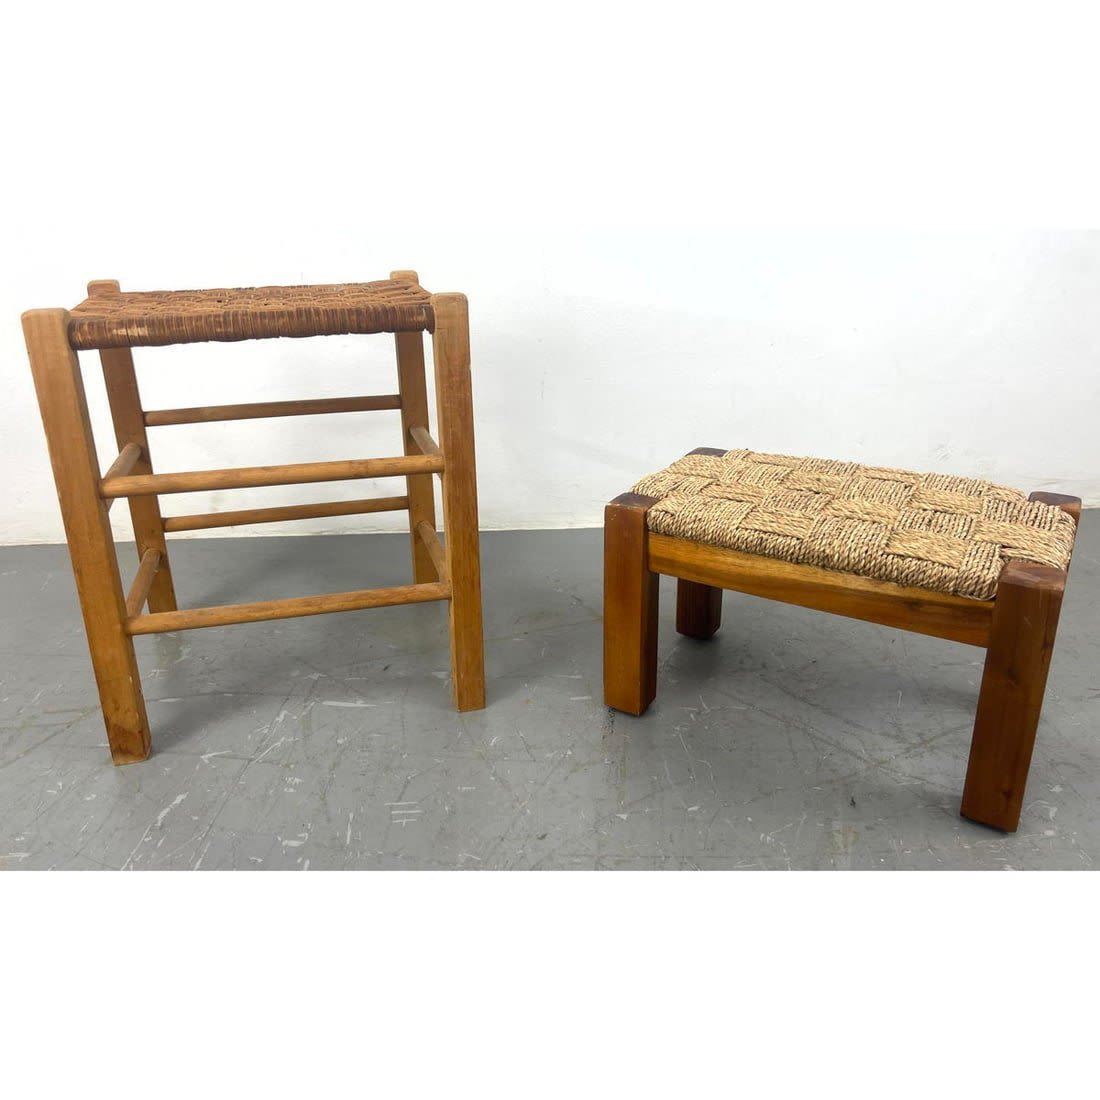 2pc Rustic Woven Seat Wood Frame 362d0c